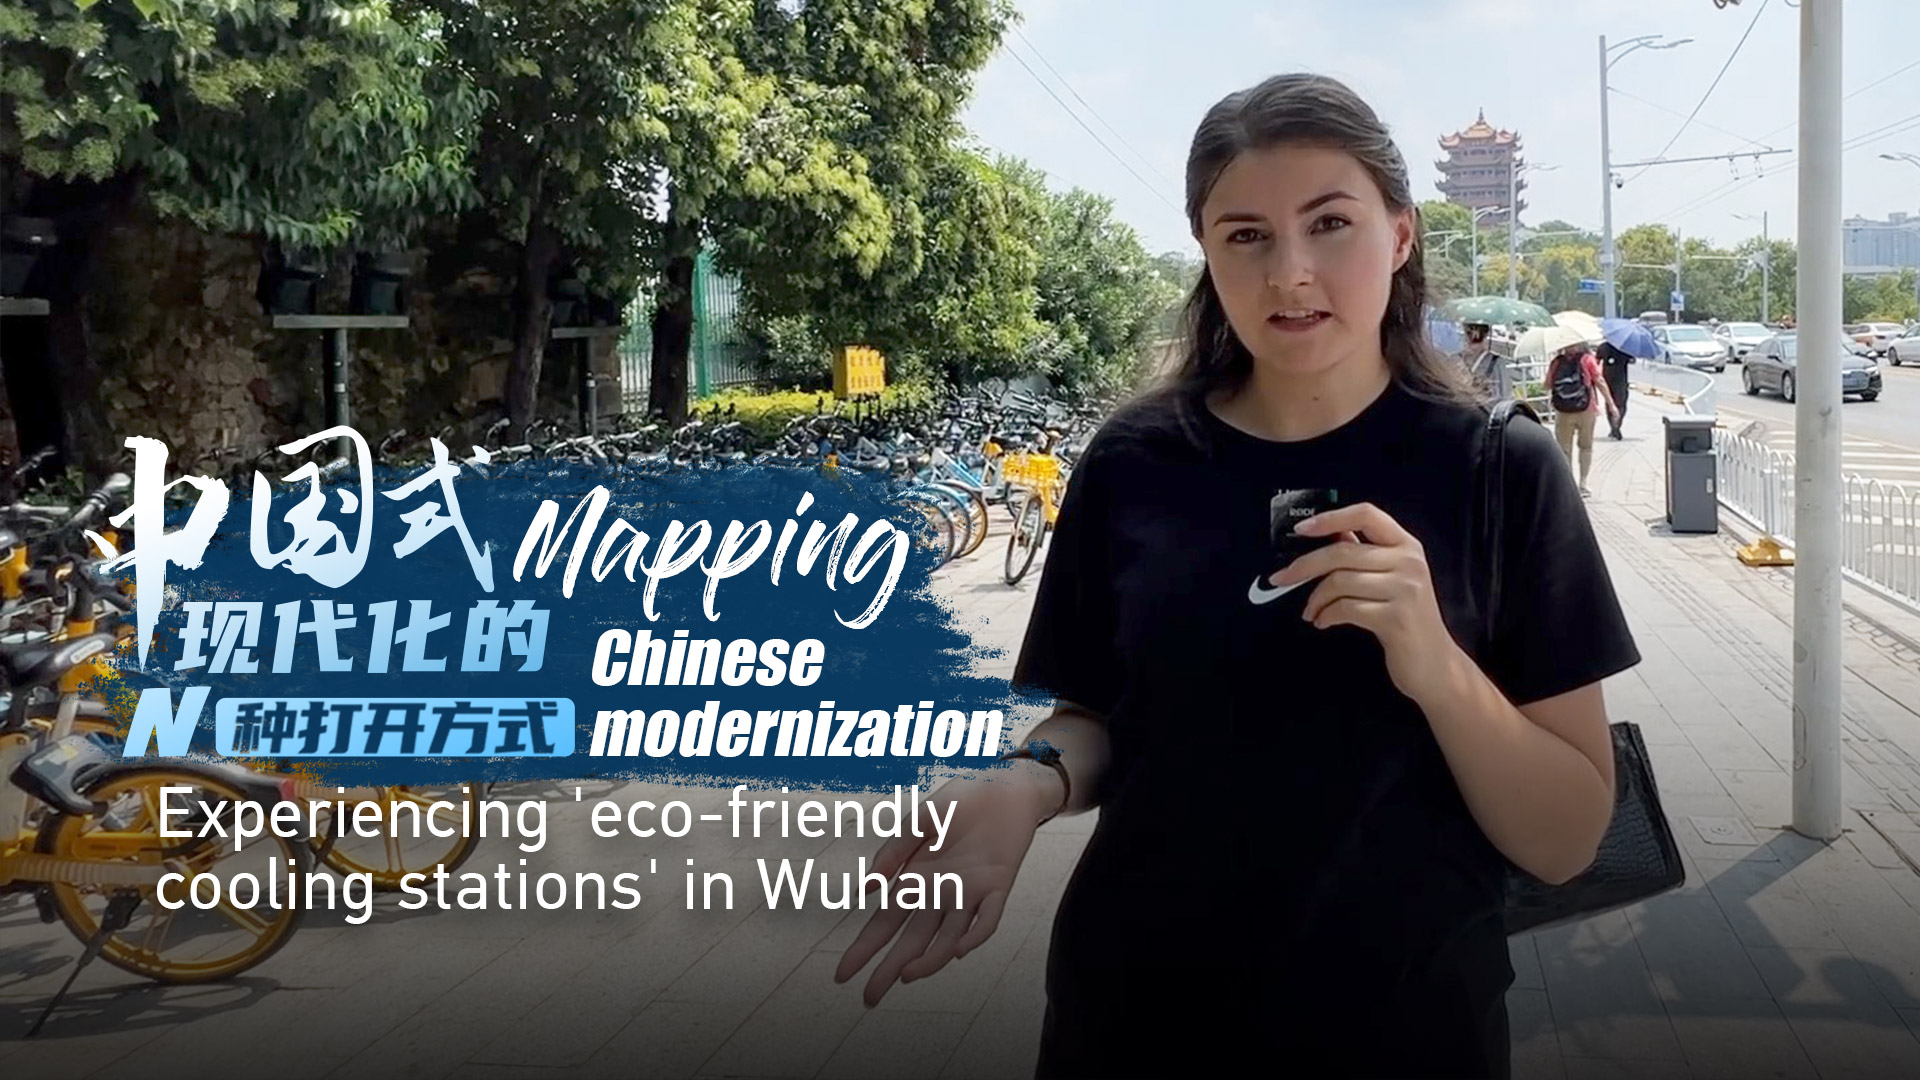 Experiencing 'eco-friendly cooling stations' in Wuhan